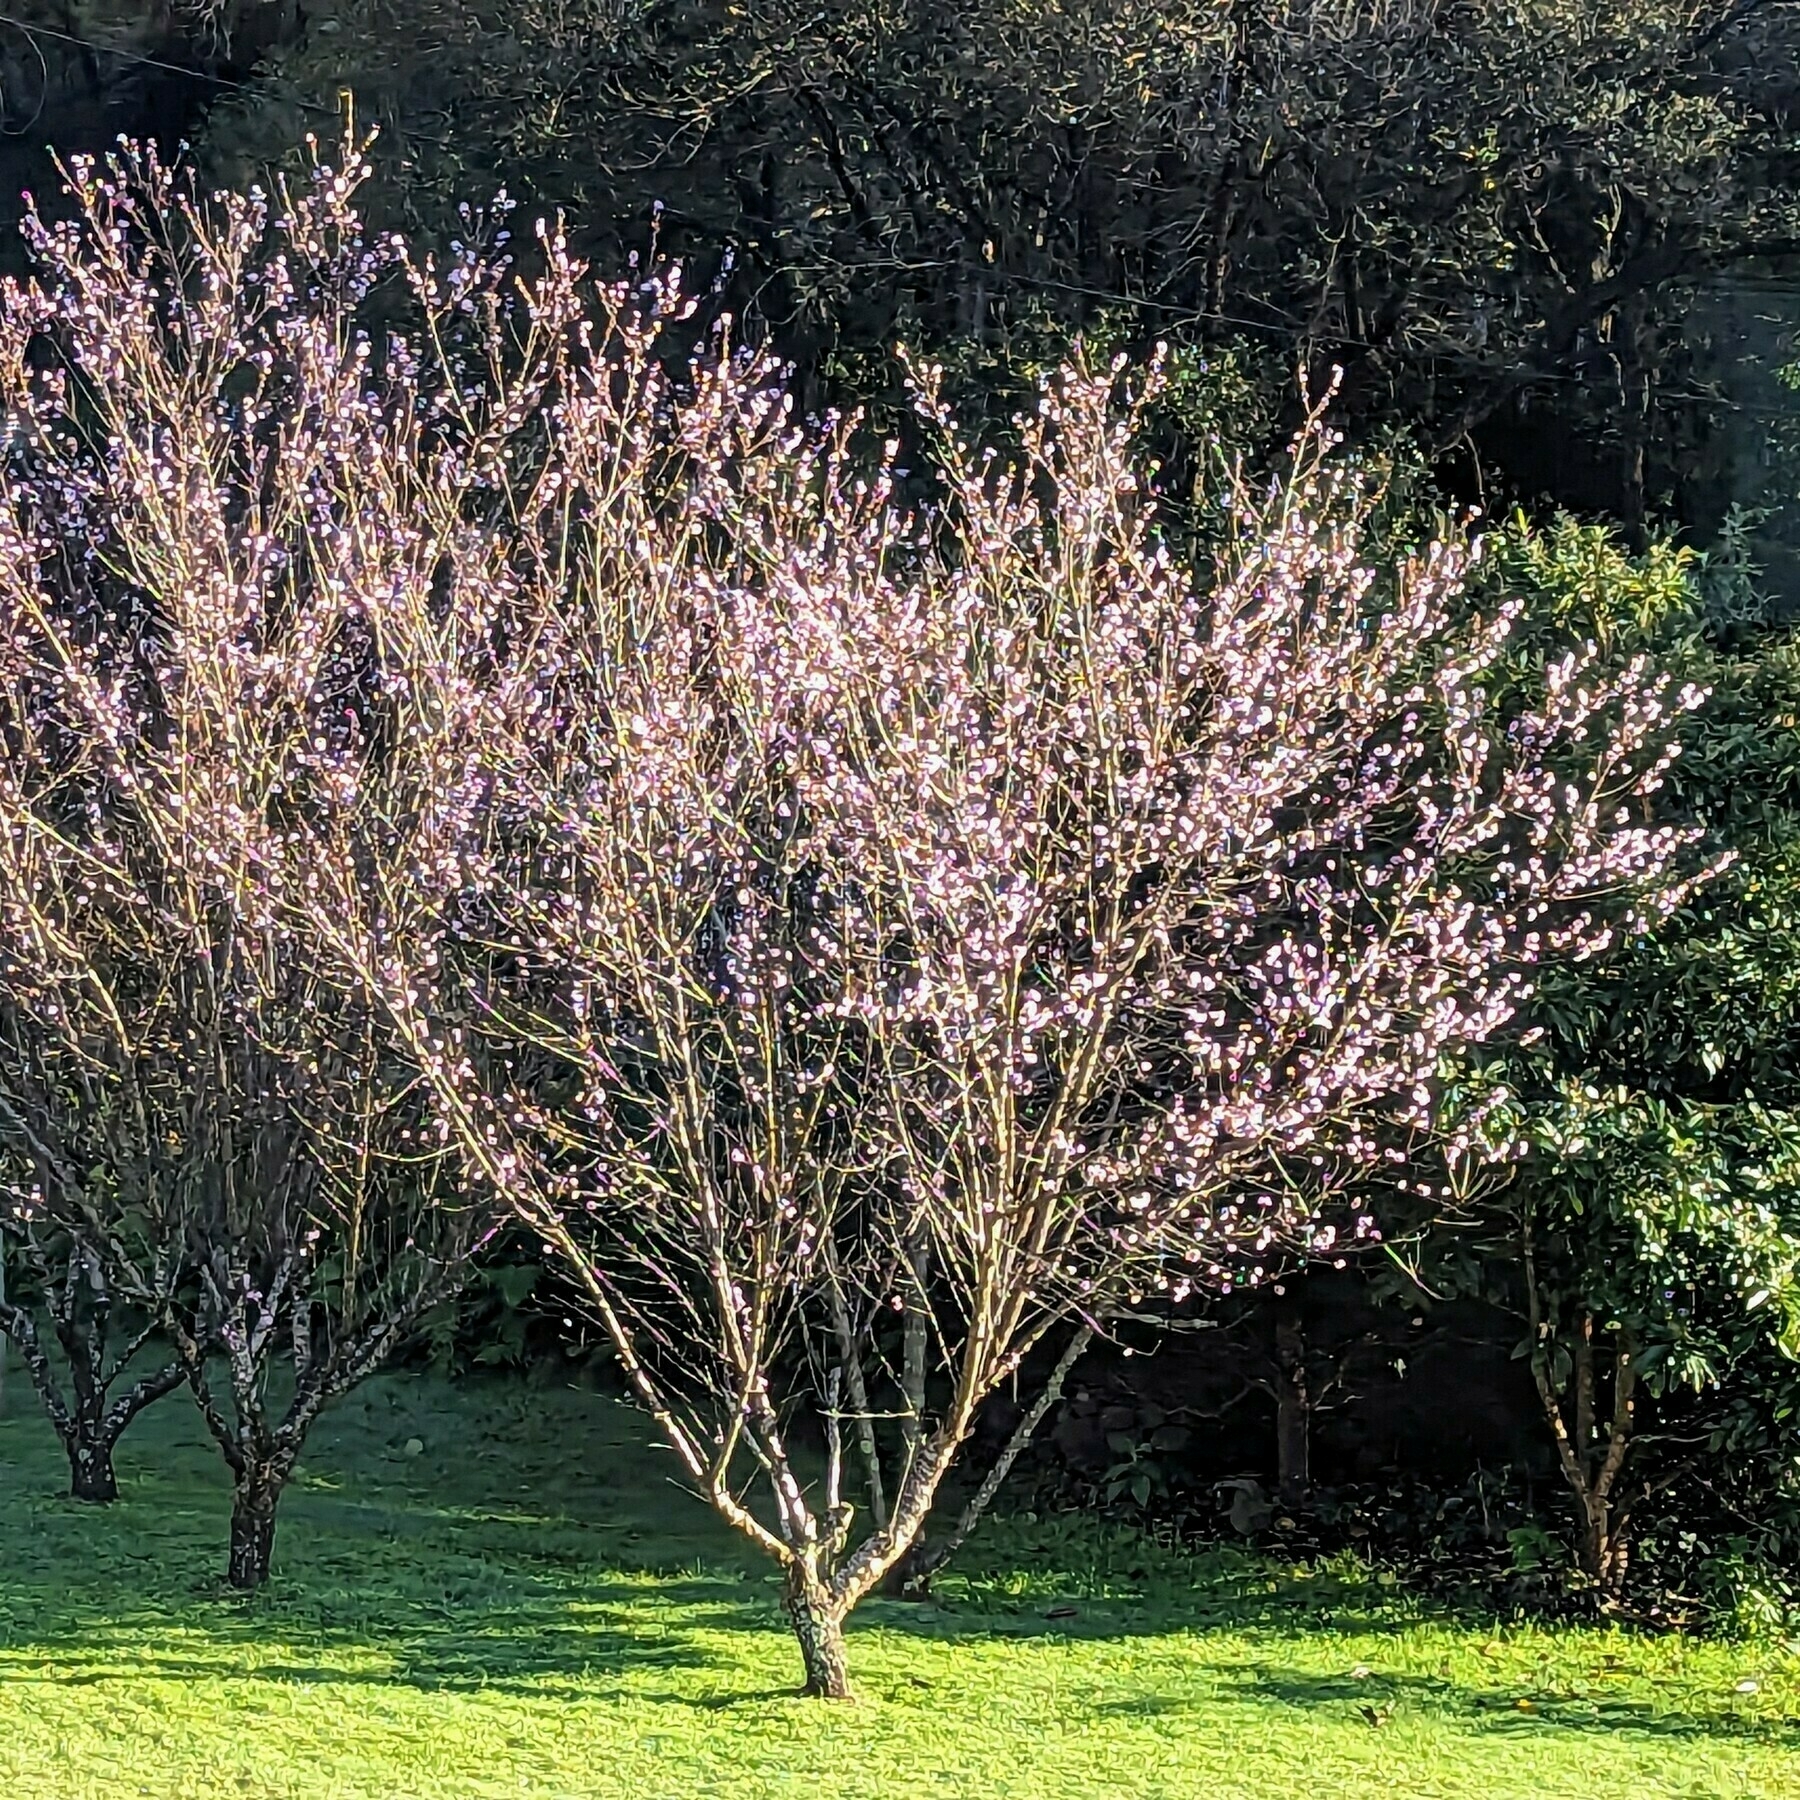 An ornamental cherry tree with fresh pink blossom.